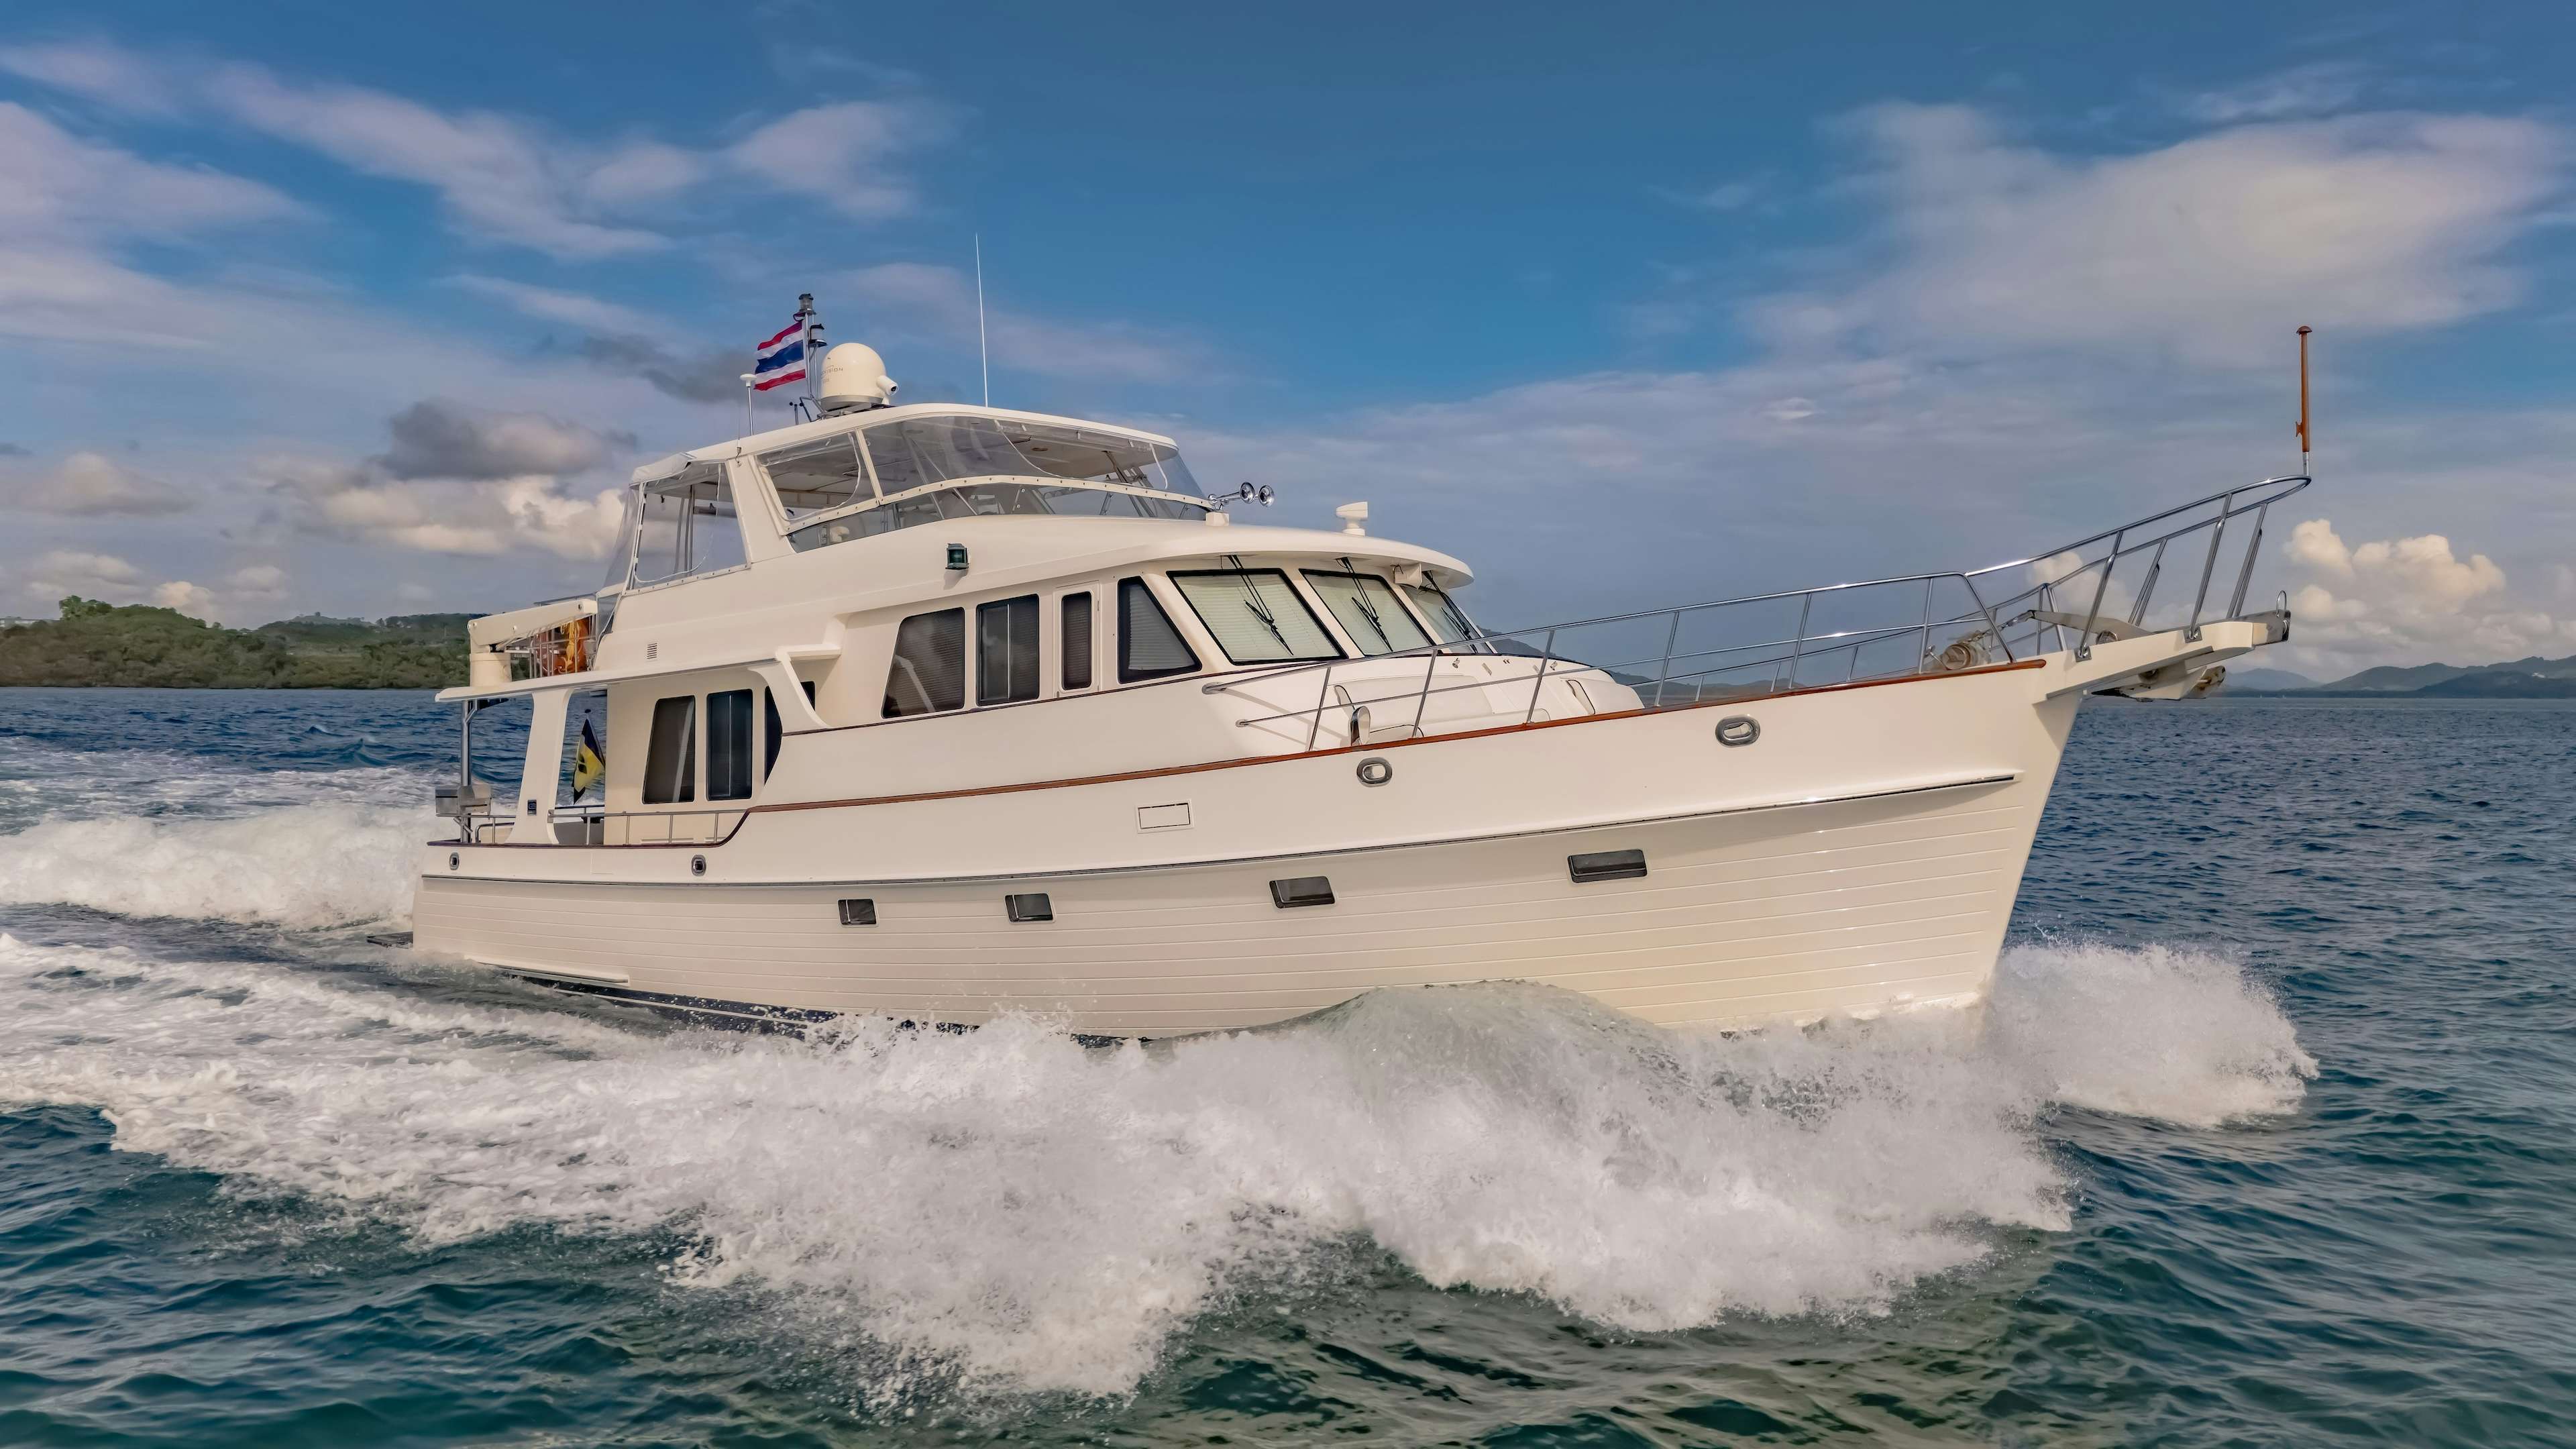 Watch Video for MAXIA III Yacht for Sale